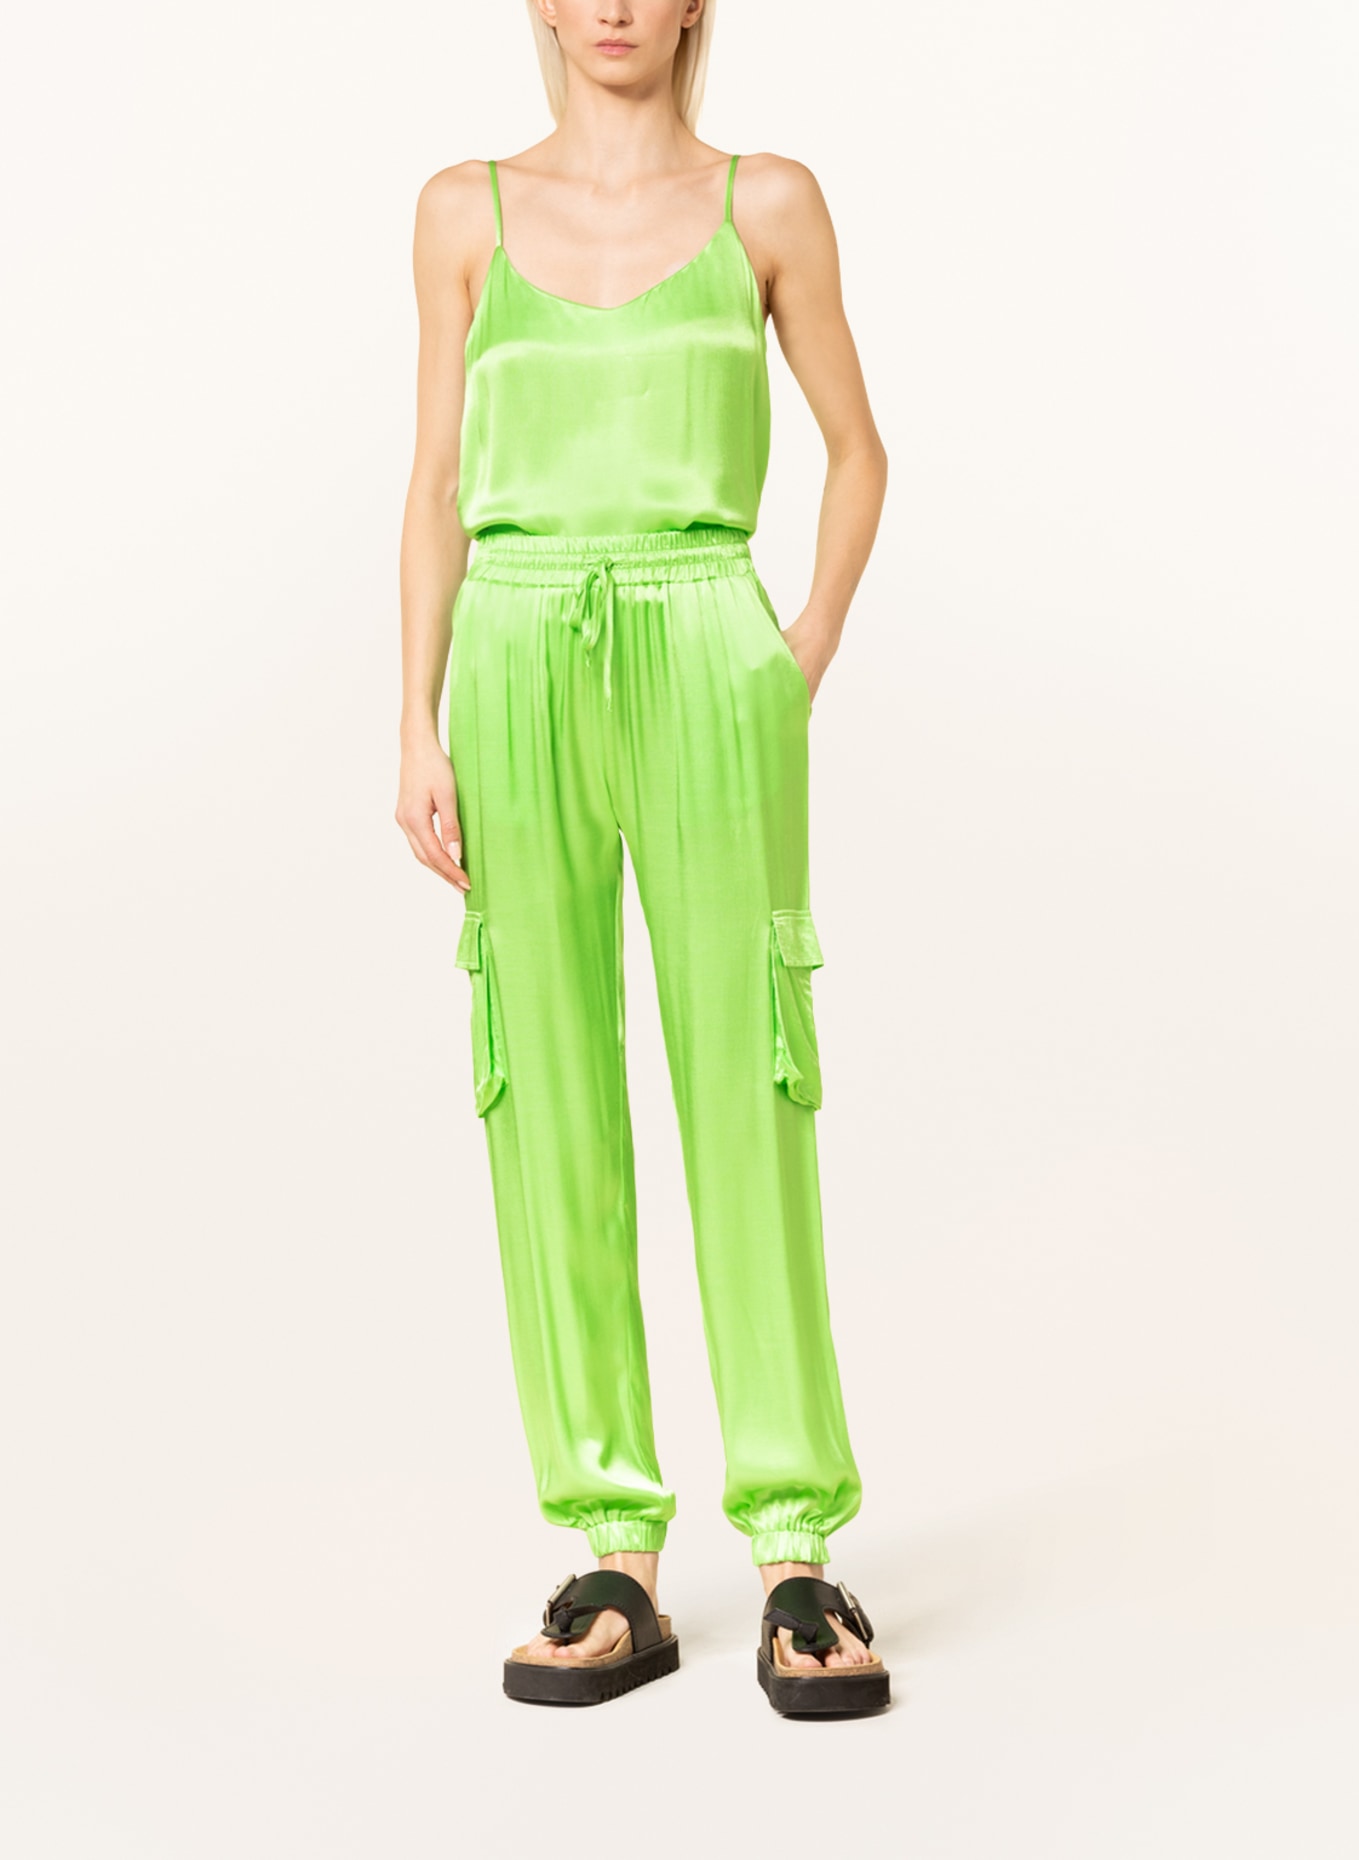 MRS & HUGS Cargo pants made of satin, Color: NEON GREEN (Image 2)